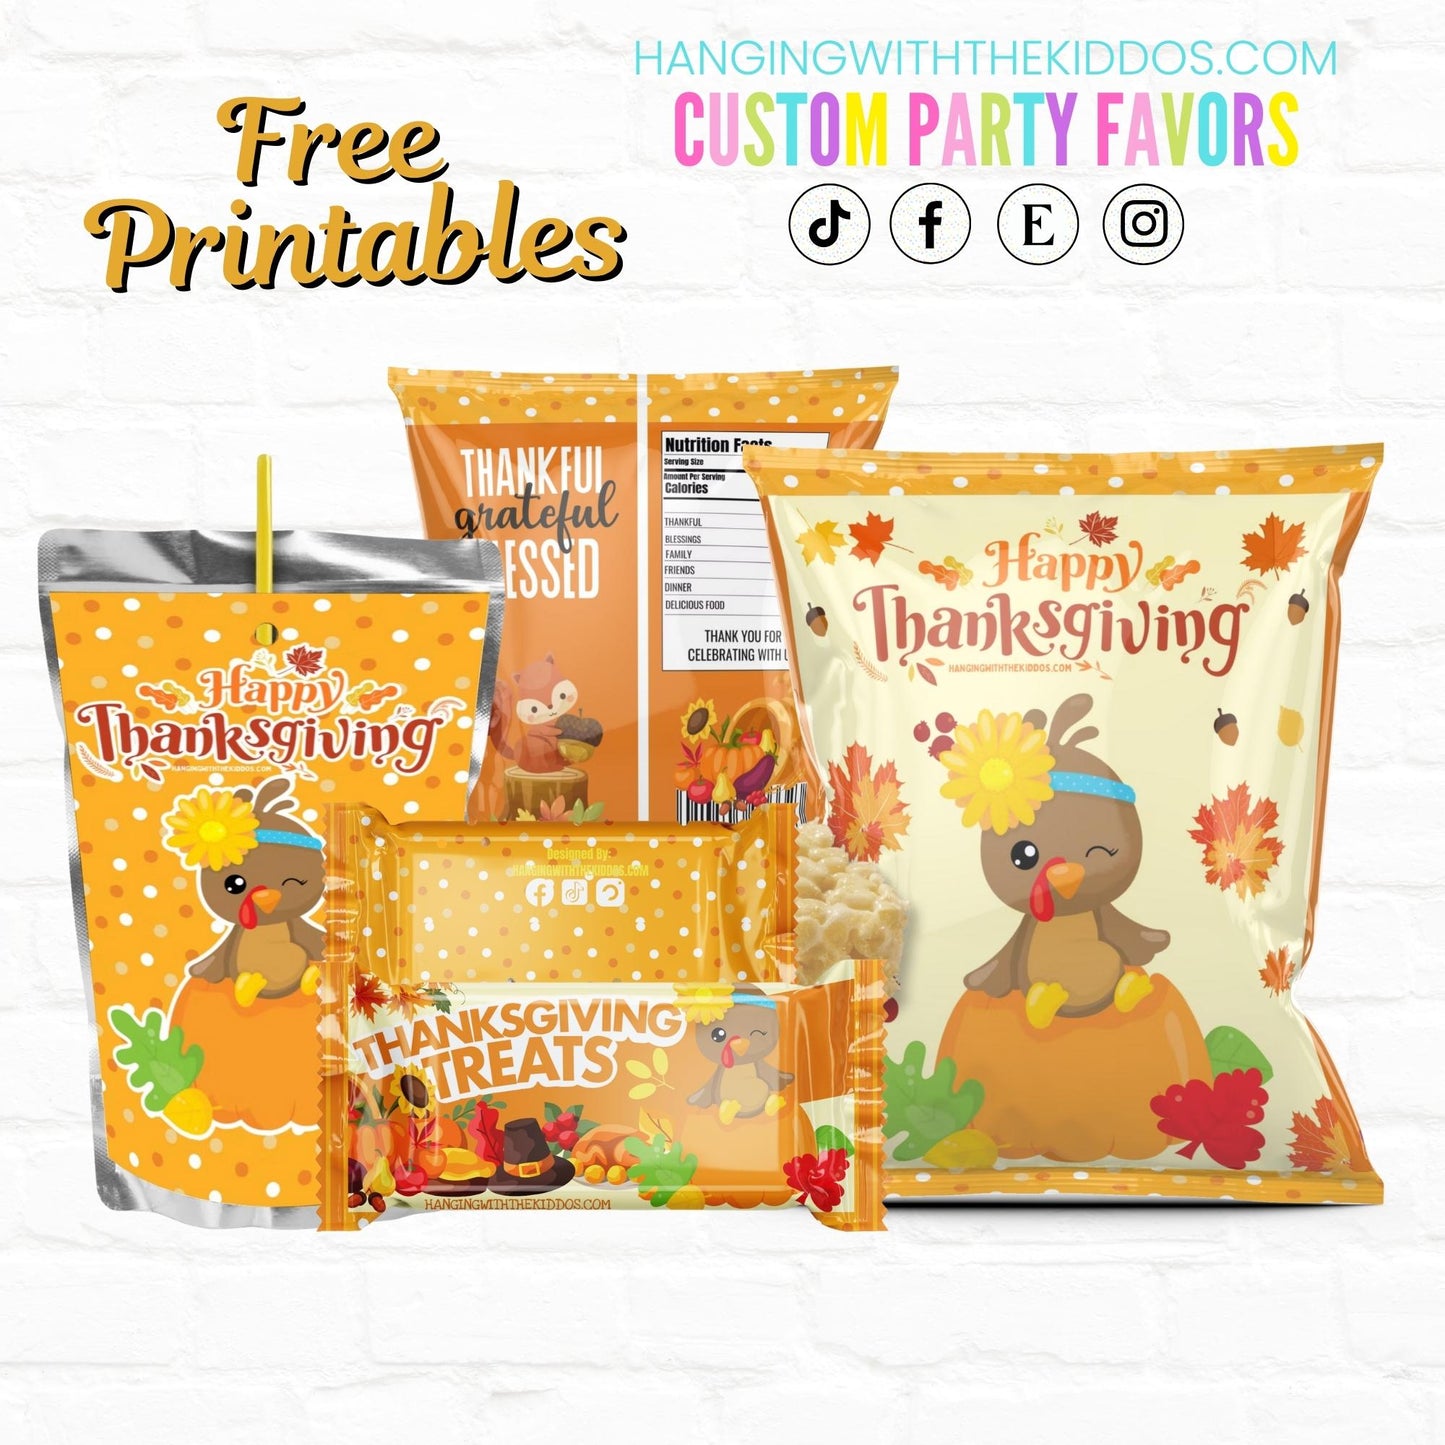 THANKSGIVING FREE PRINTABLES PACKAGE